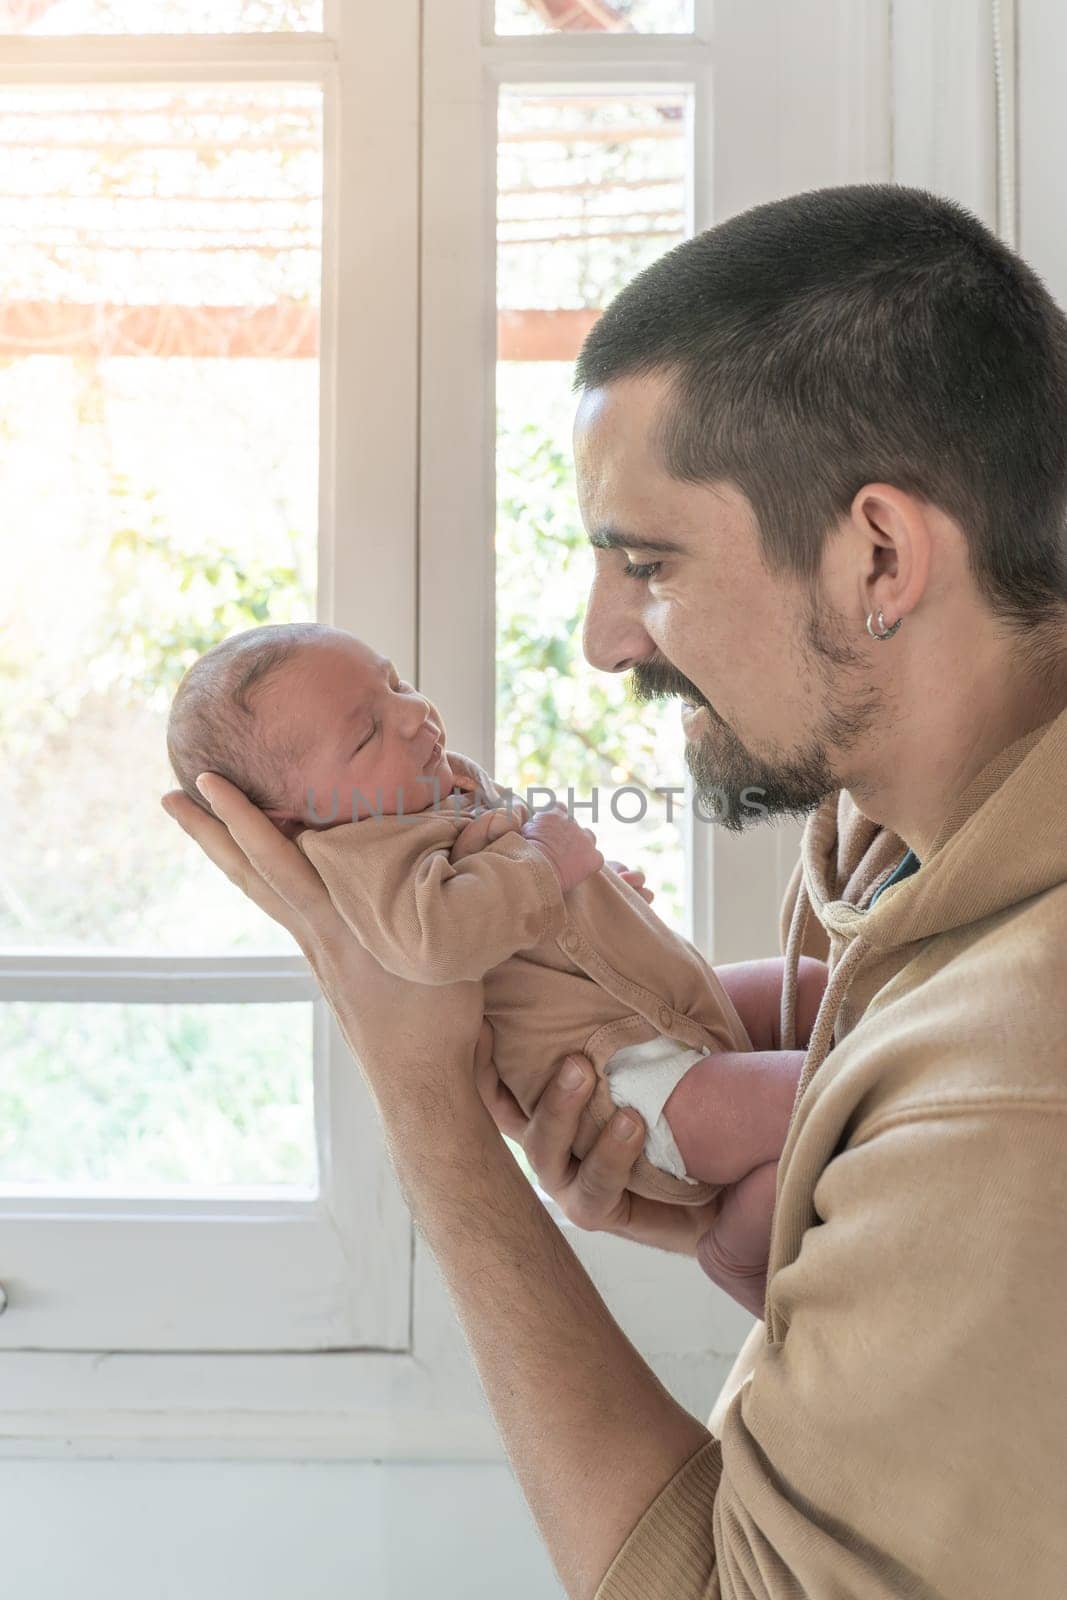 Smiling father and his newborn daughter, a couple of hours old. High quality vertical photo